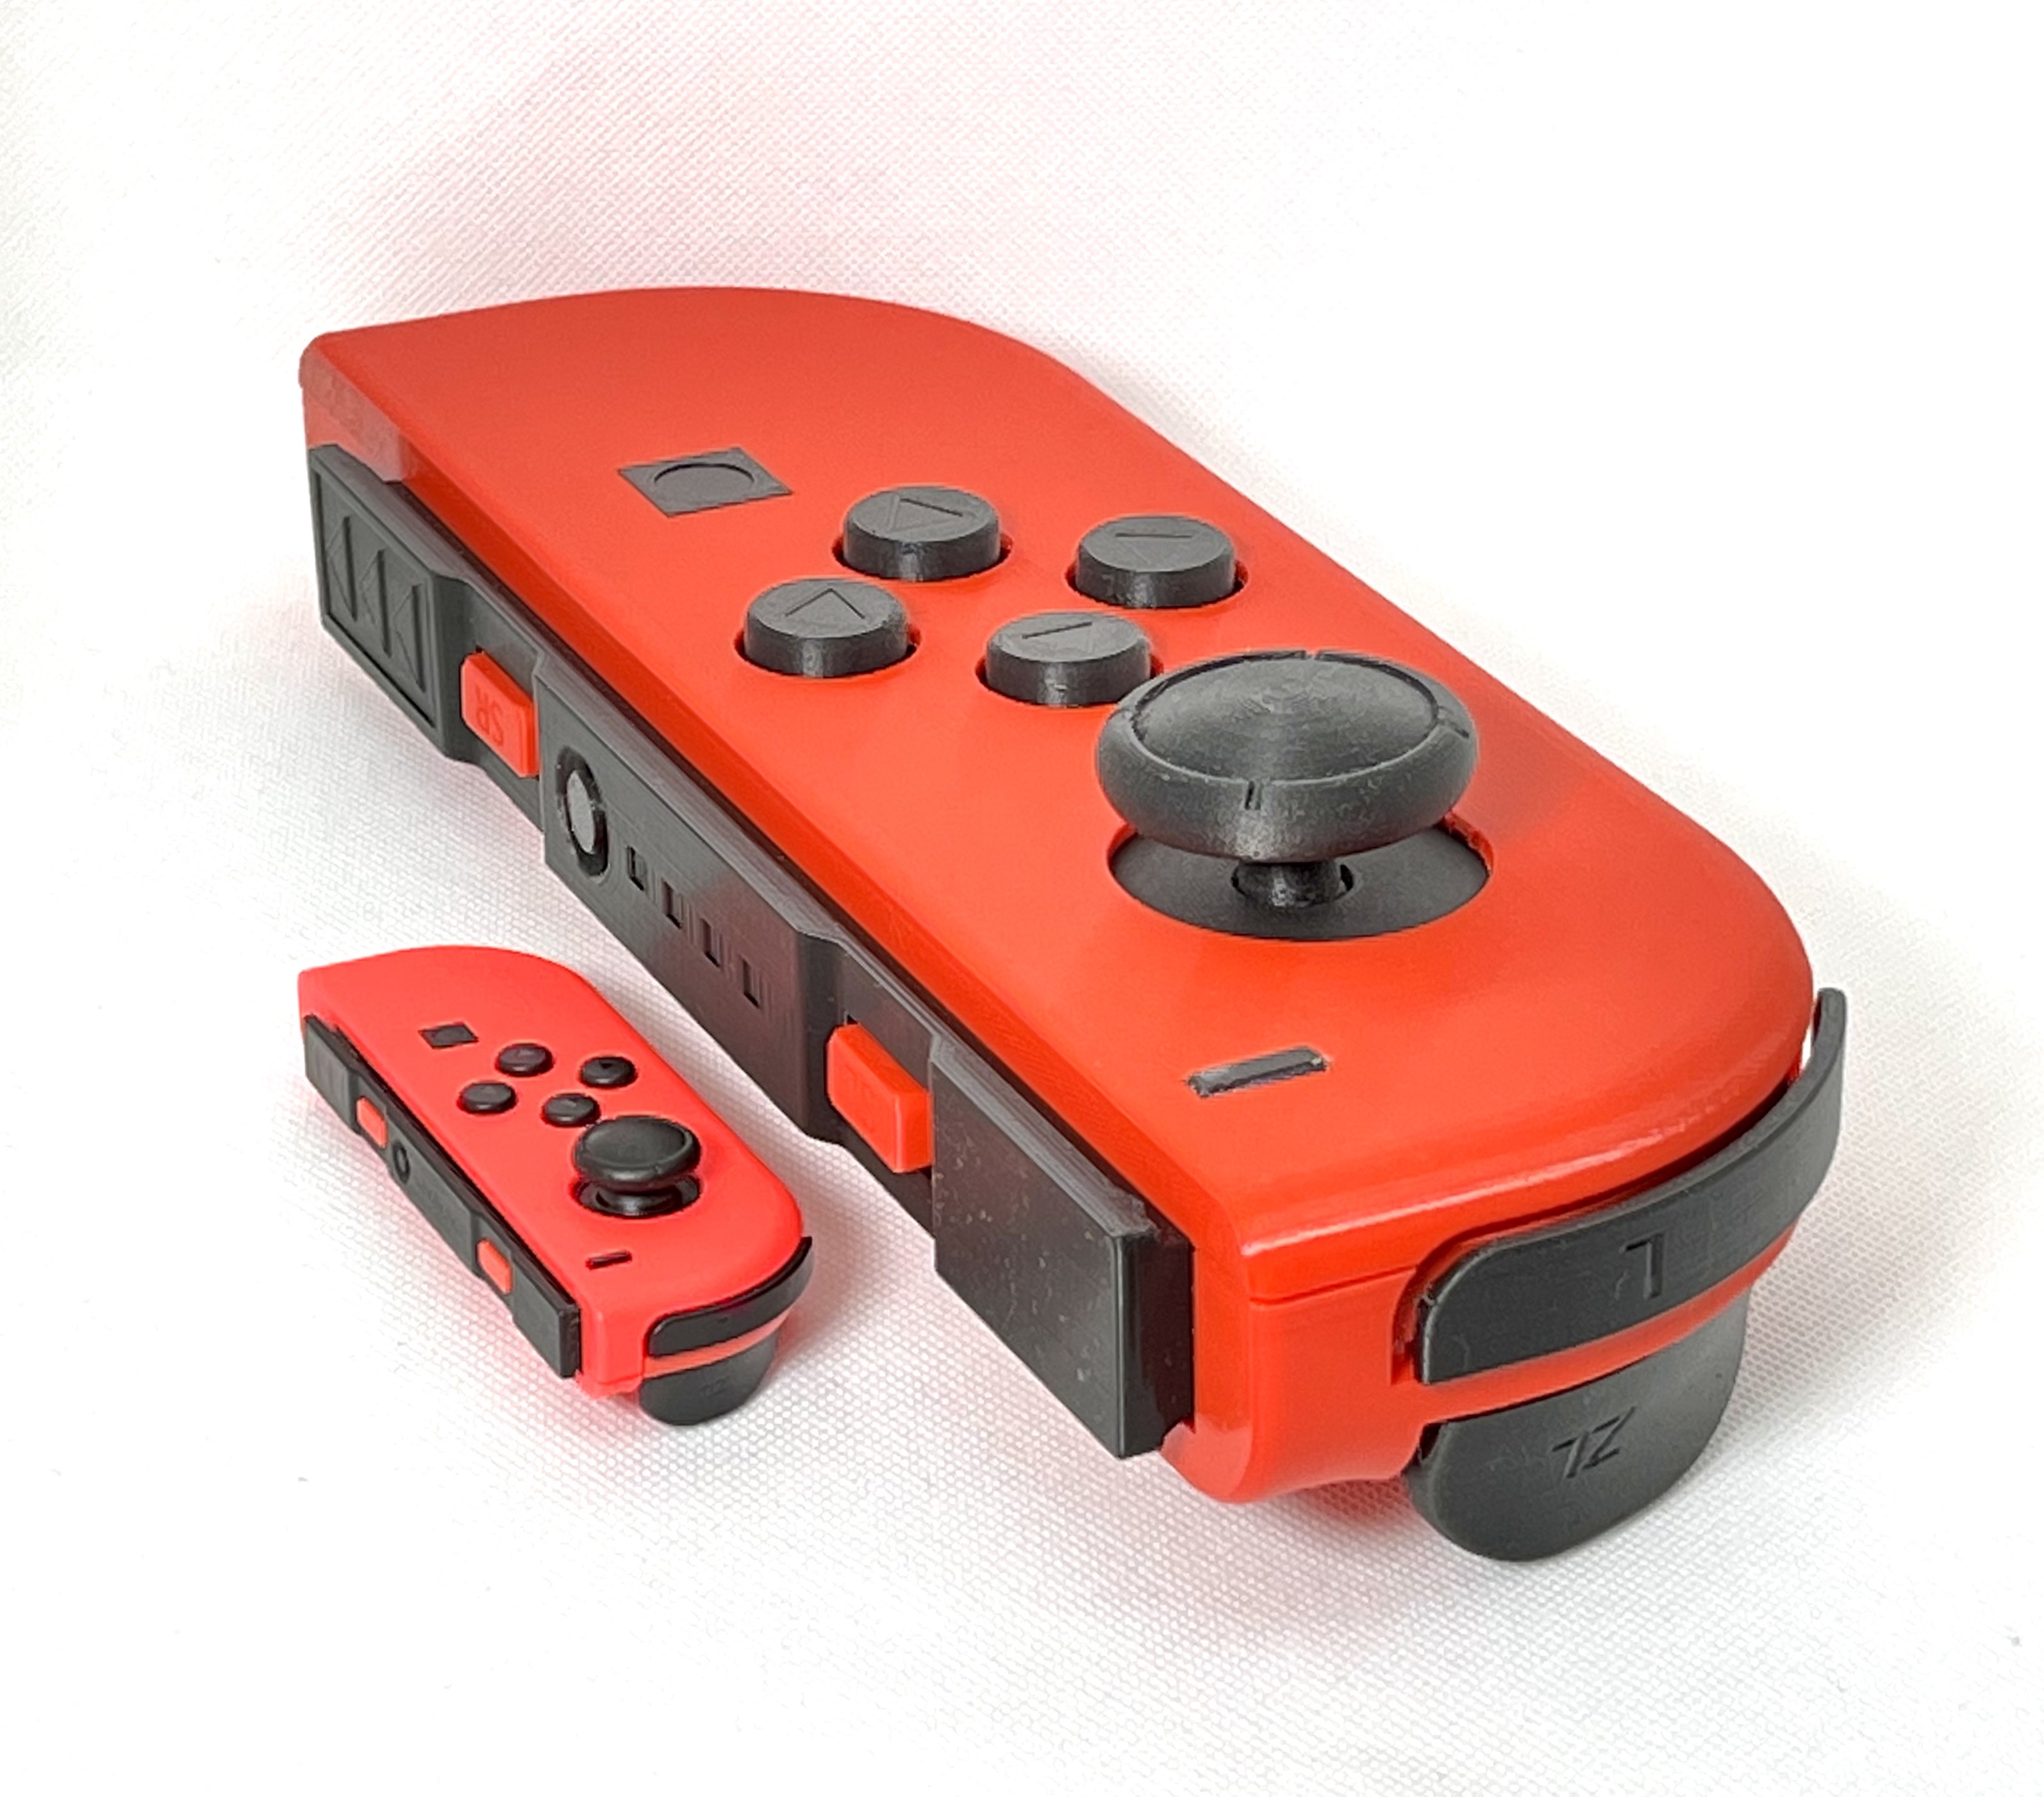 Nintendo Switch Right Joy-Con Controller Red